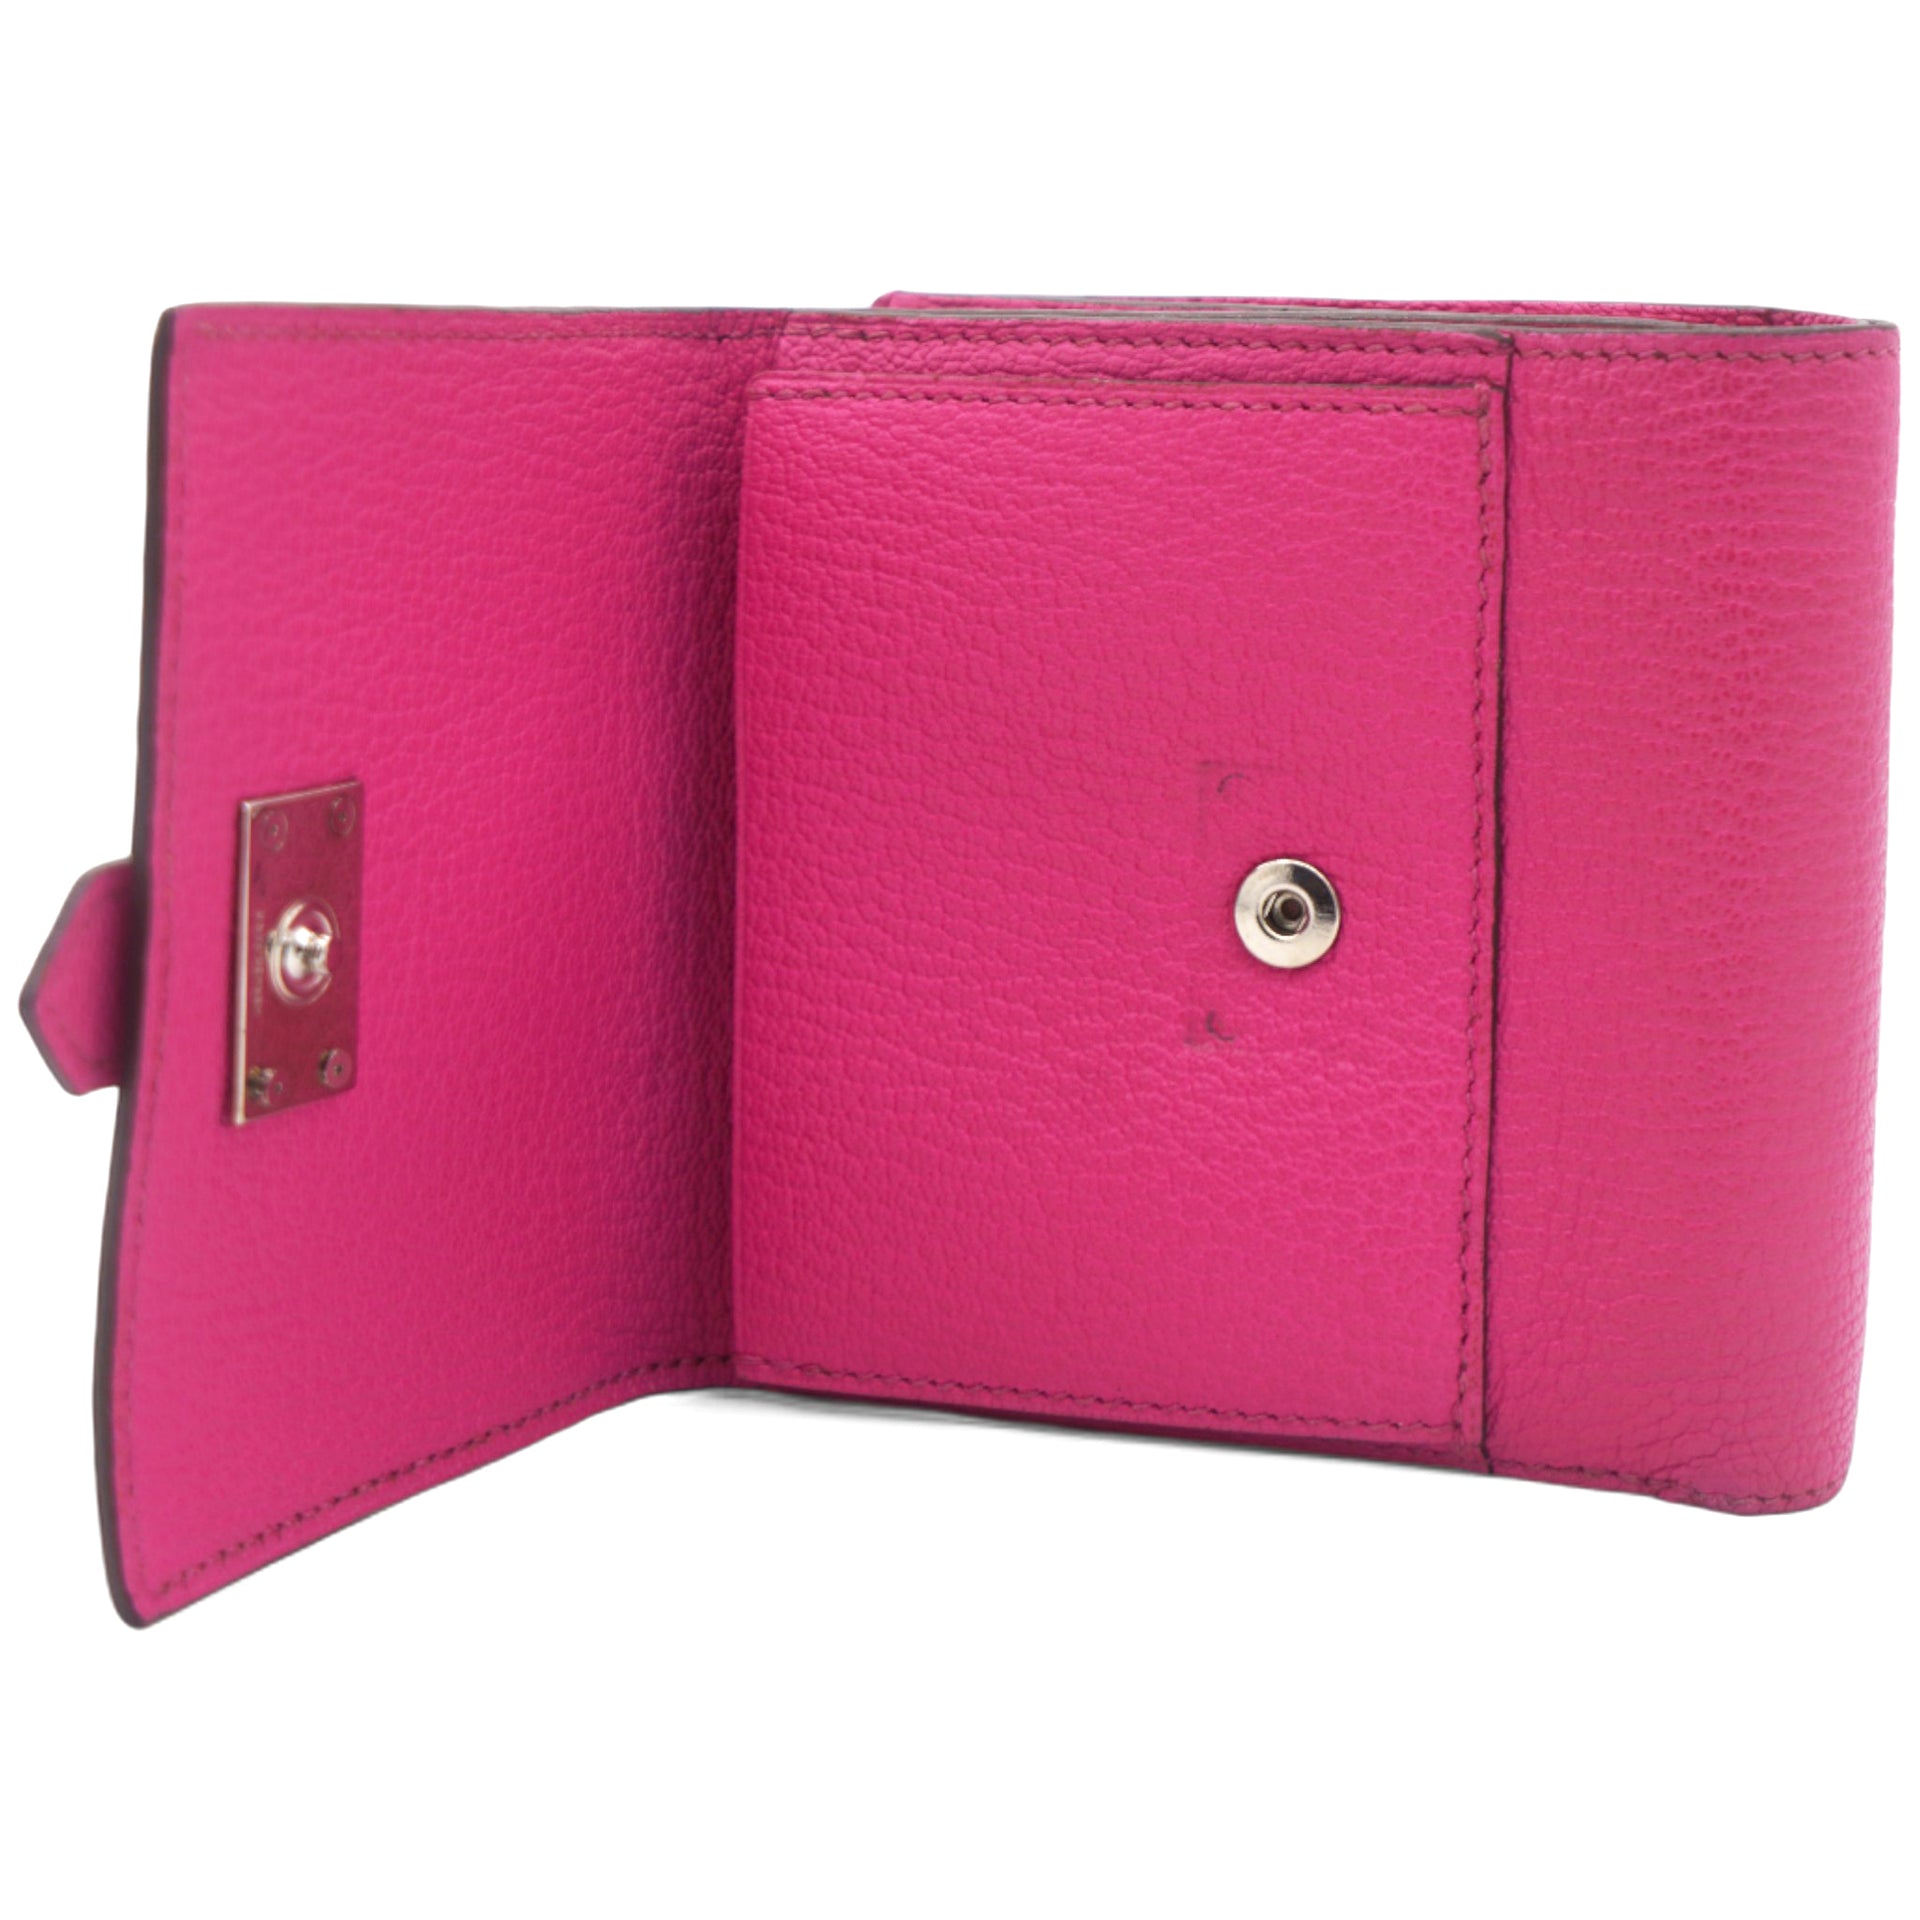 Bearn Compact wallet Epsom leather Rose purple